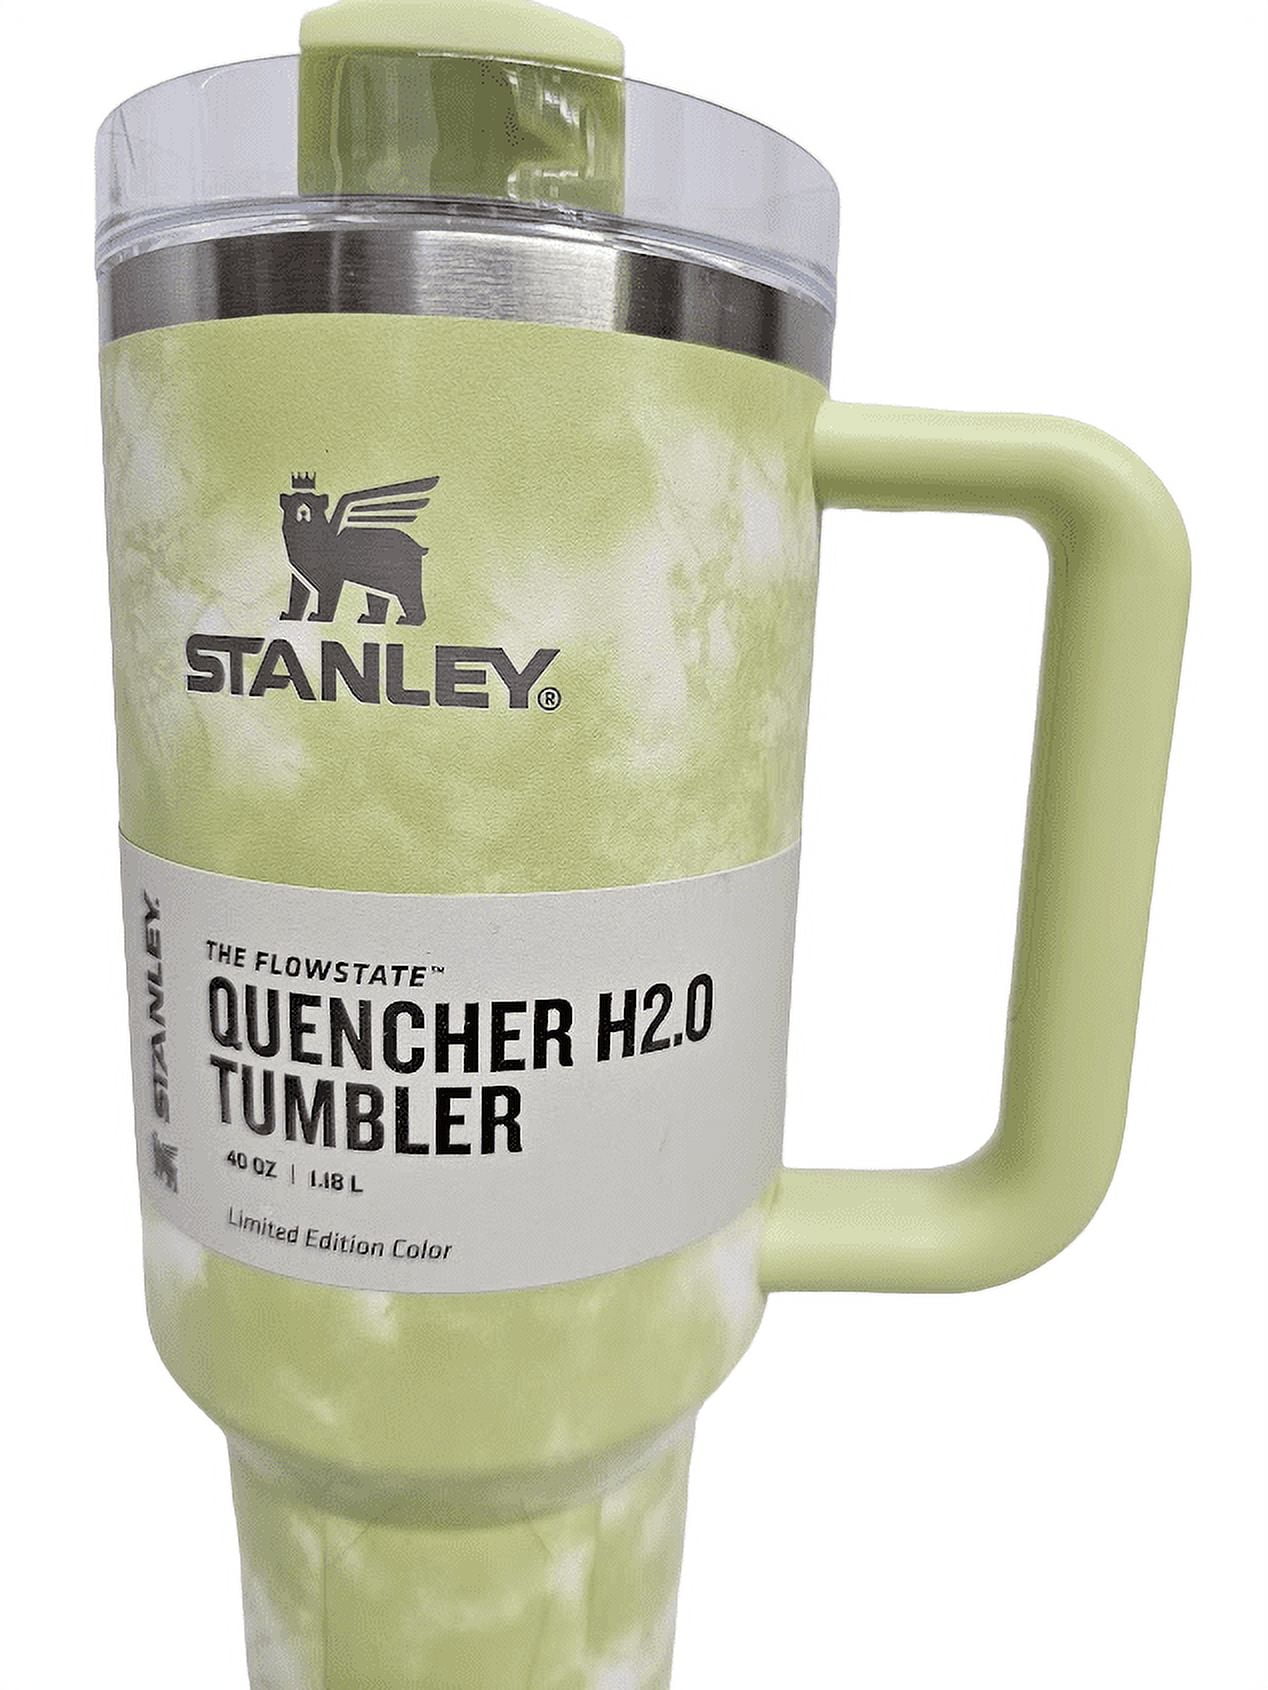 ✨ BRILLIANT WHITE Stanley 40 oz FlowState Quencher H2.0 Tumbler Limited  Edition